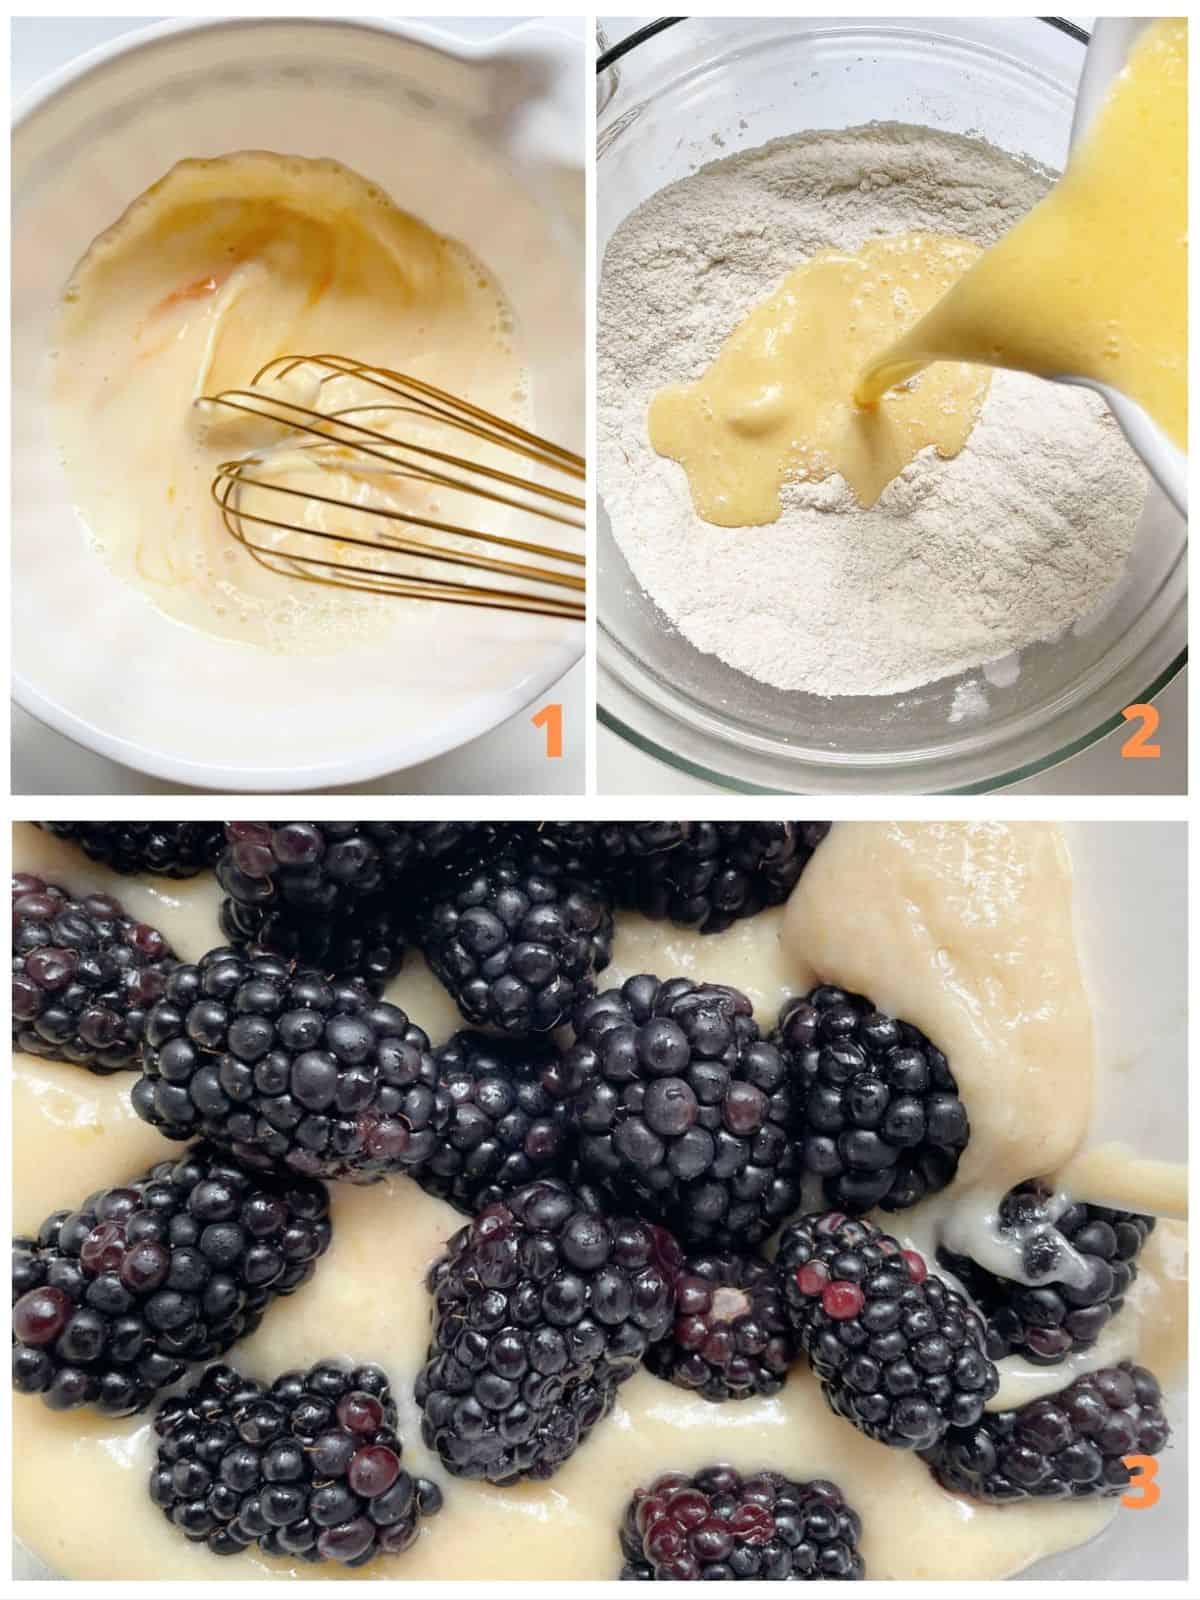 Three image collage showing mixing of blueberry muffins in glass bowl with gold whisk.